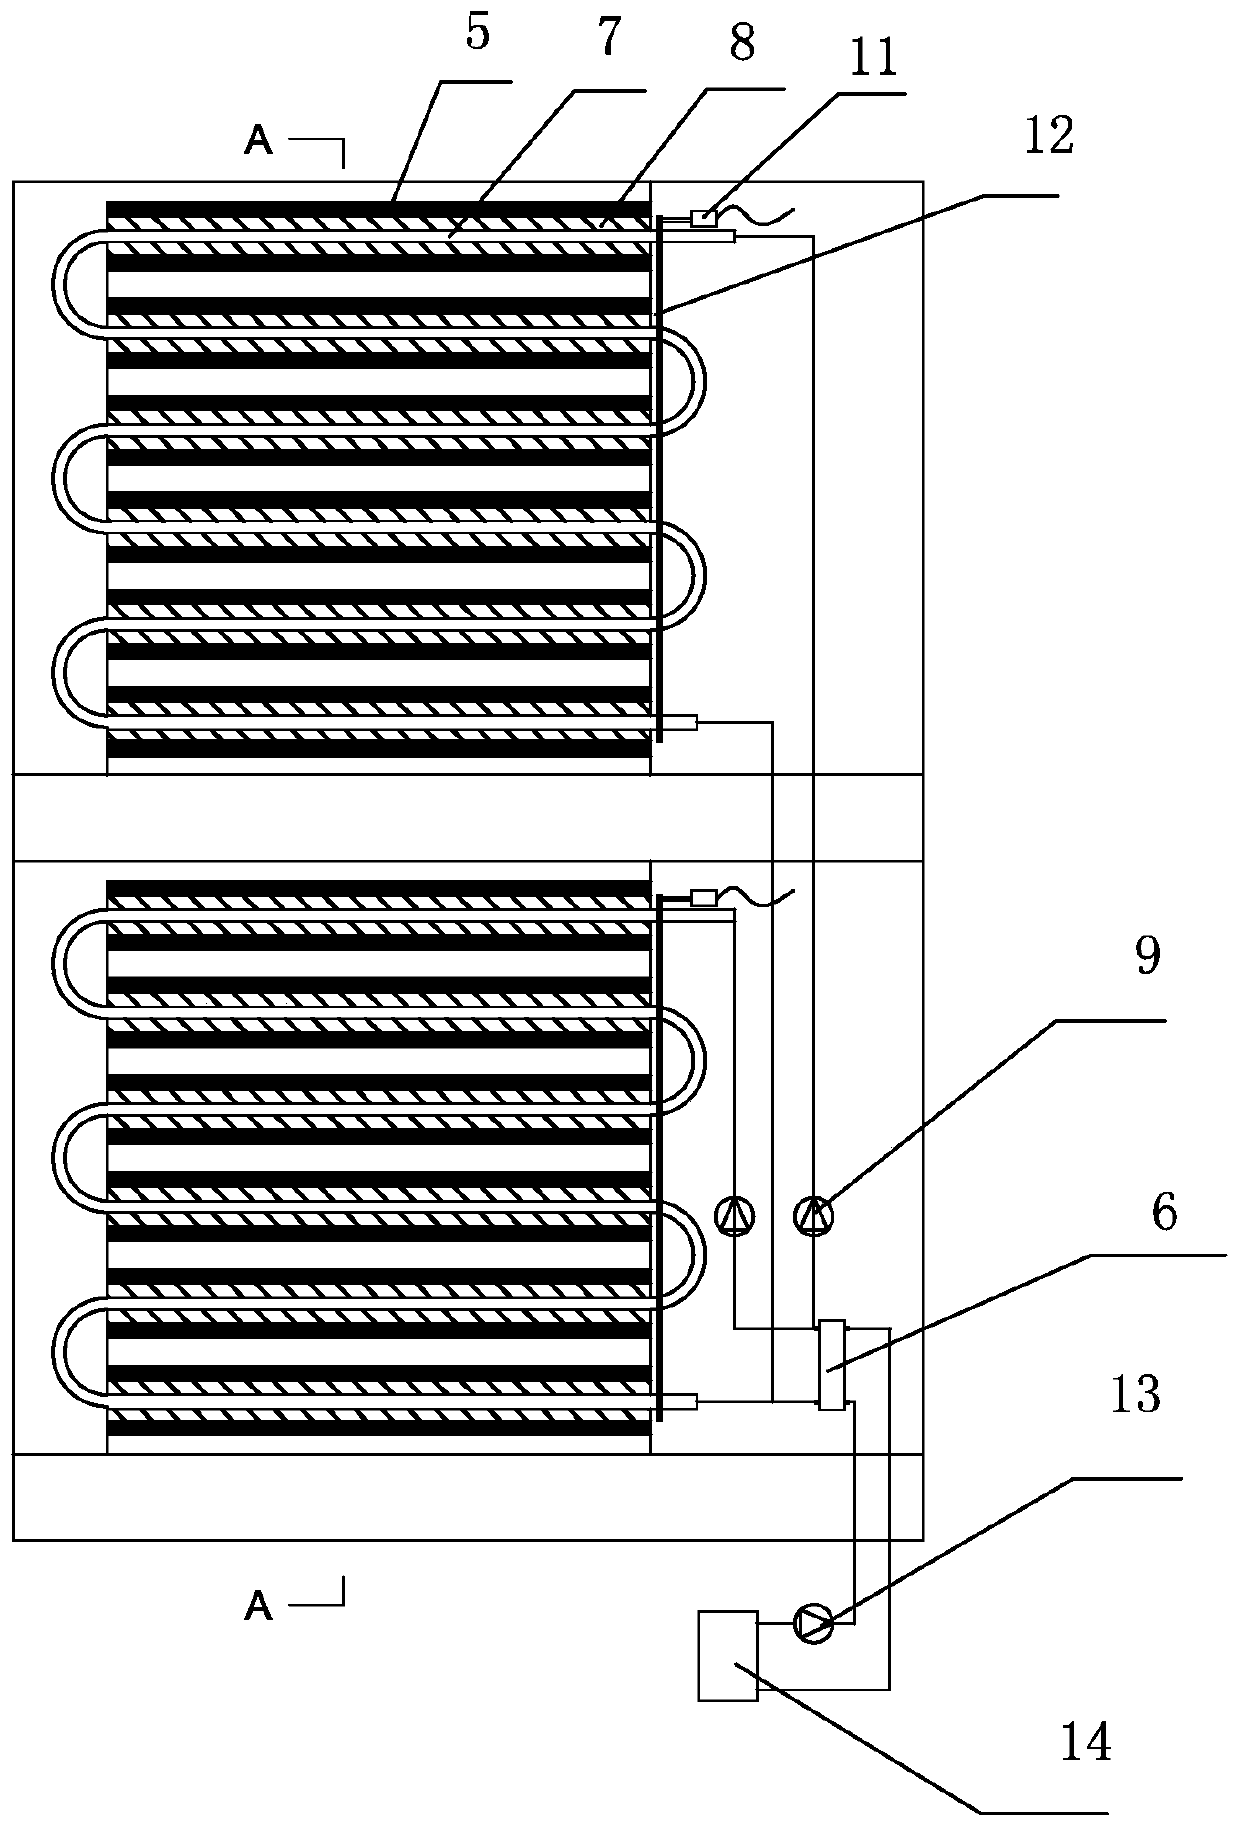 Light-transmitting enclosure structure with energy supply and energy storage functions